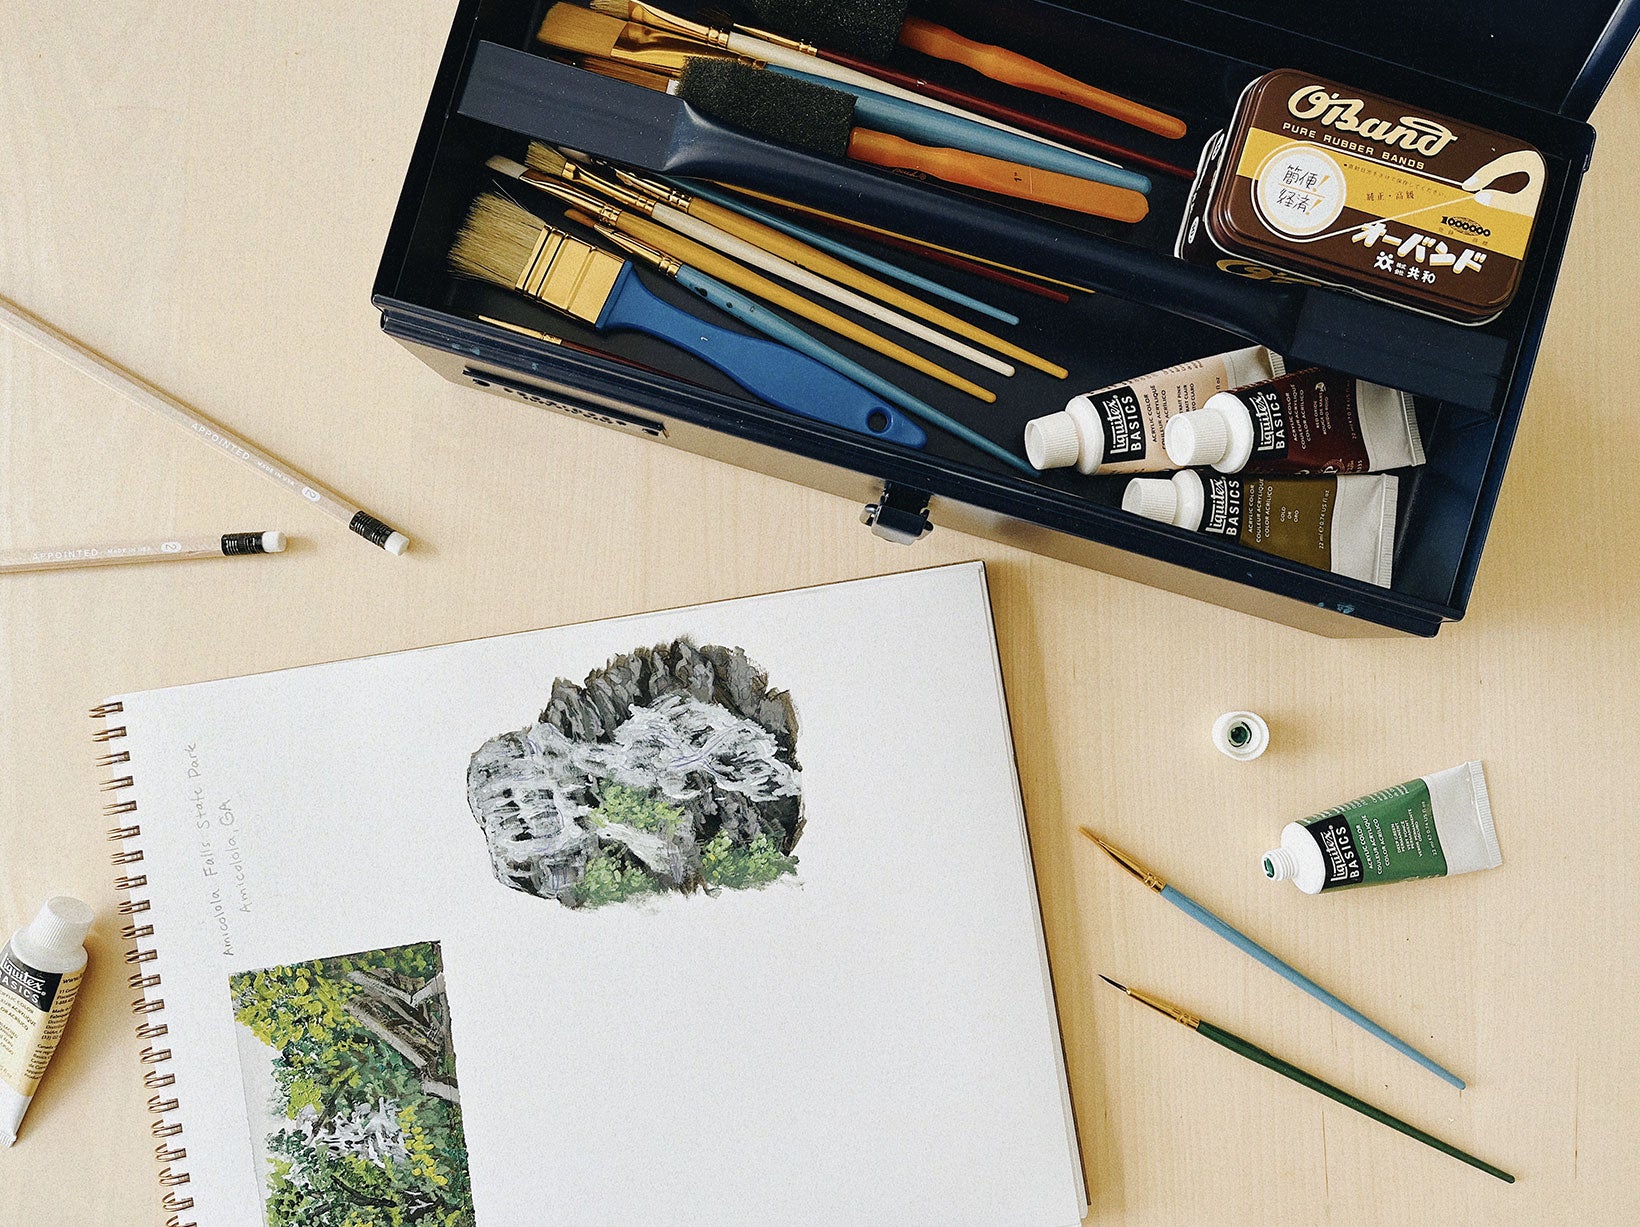 the toolbox in midnight is filled with art supplies including paints, pencils, and brushes. a sketch pad sits open with paintings of natural scenes against a wood table.